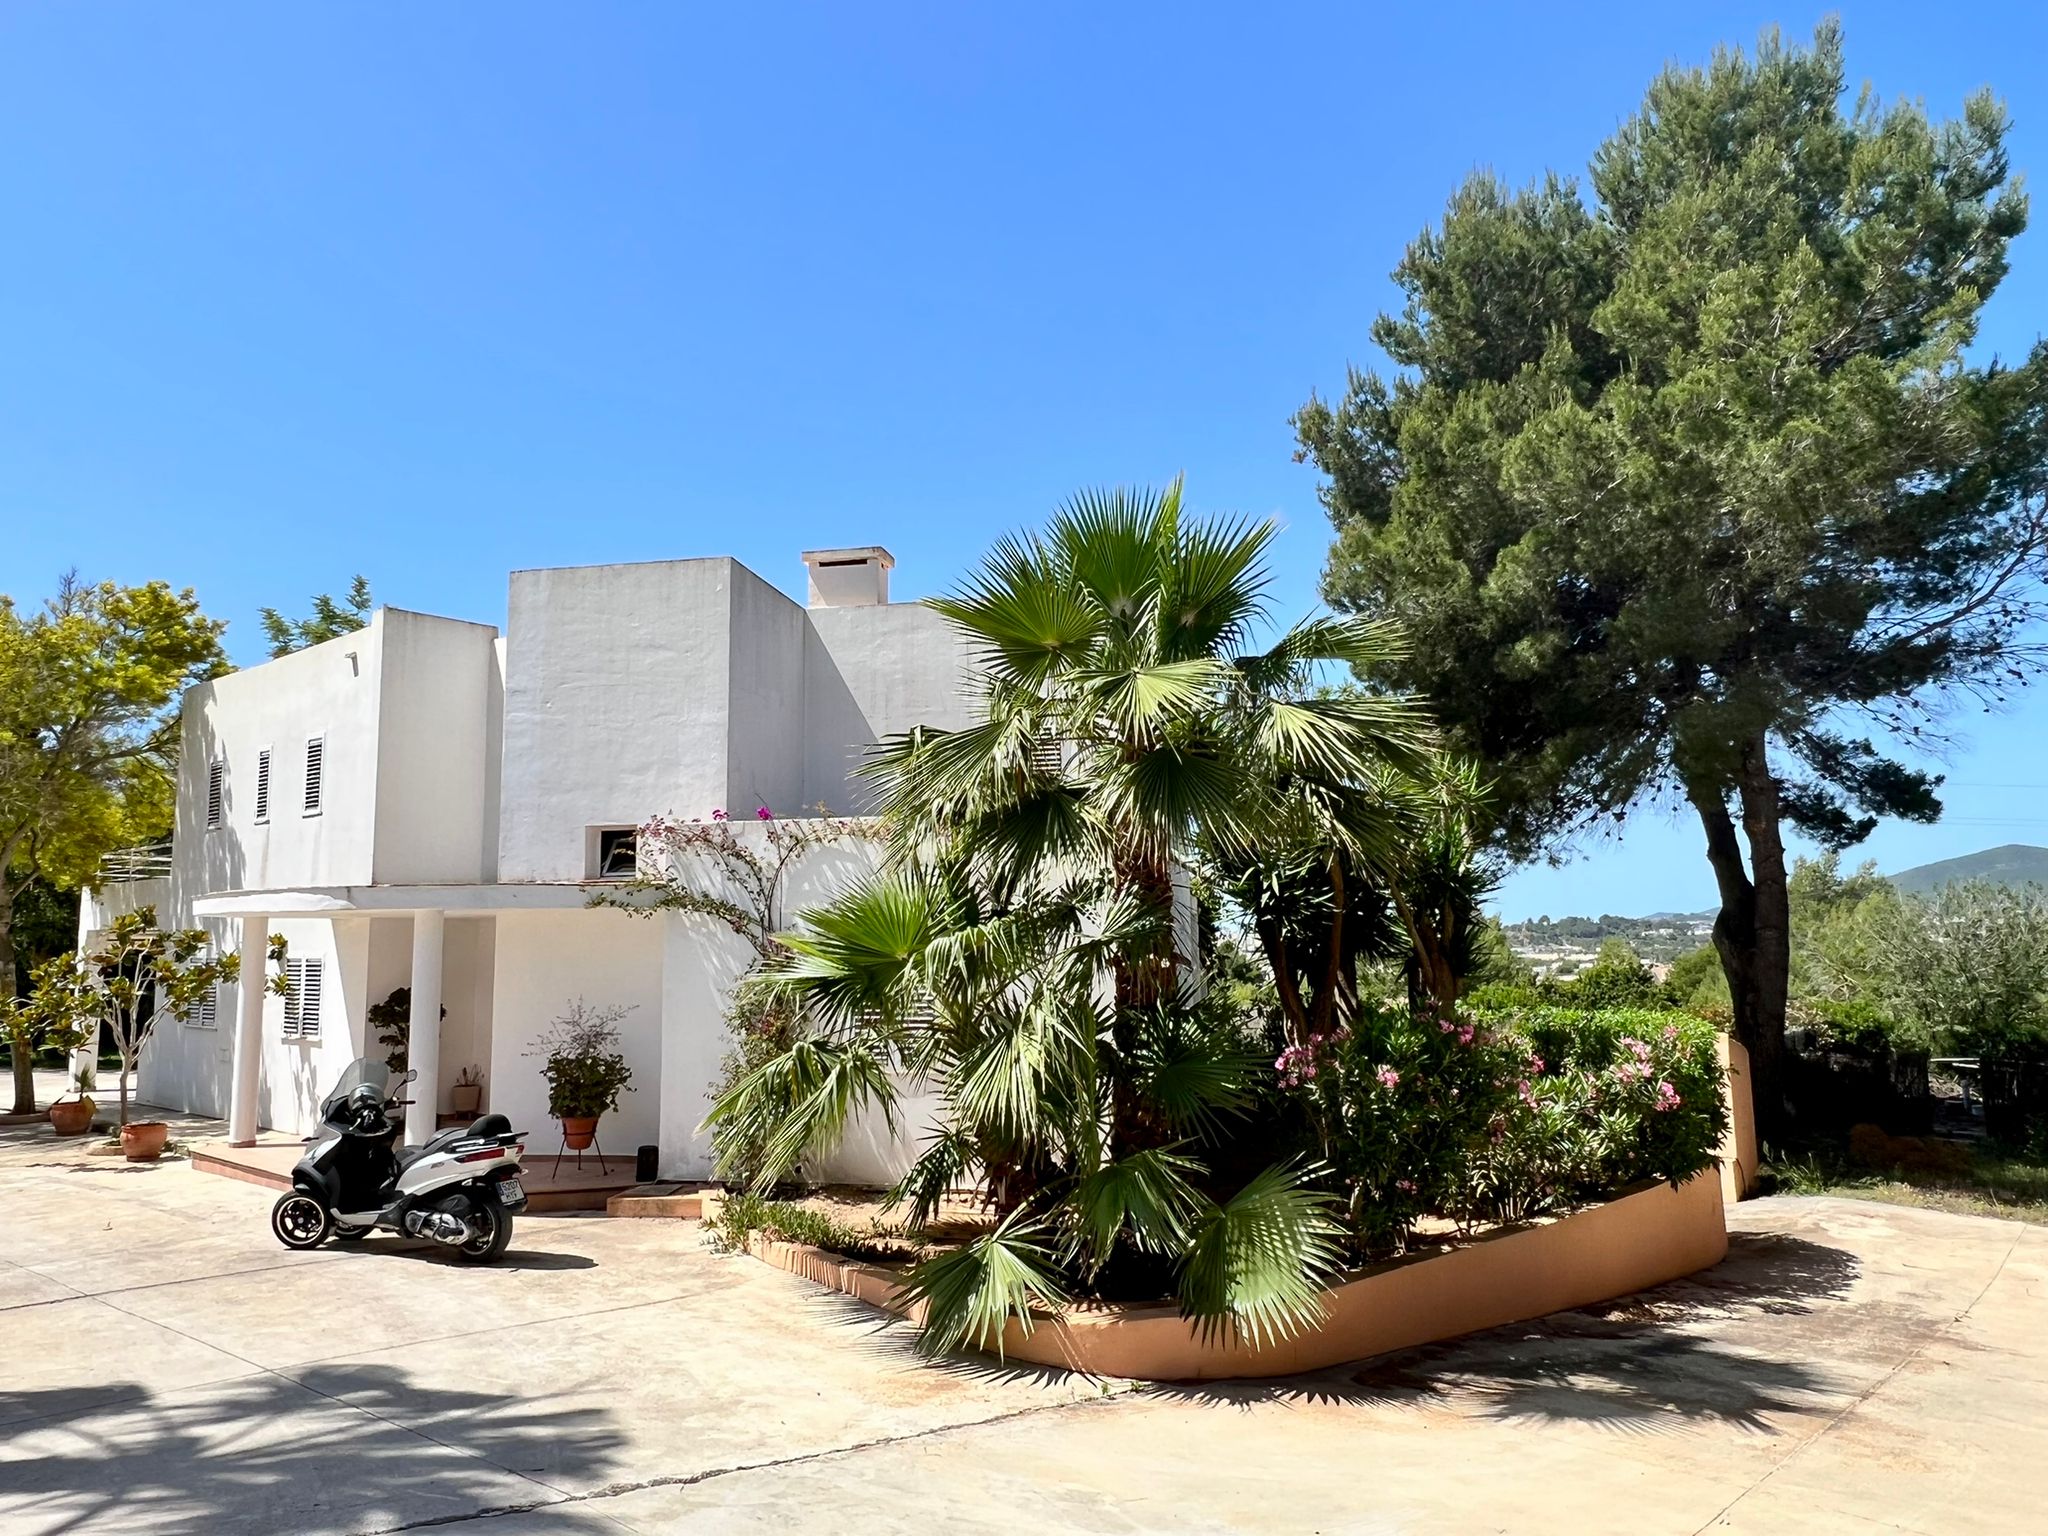 Villa in Jesus with panoramic views to the country side up to D'Alt Villa